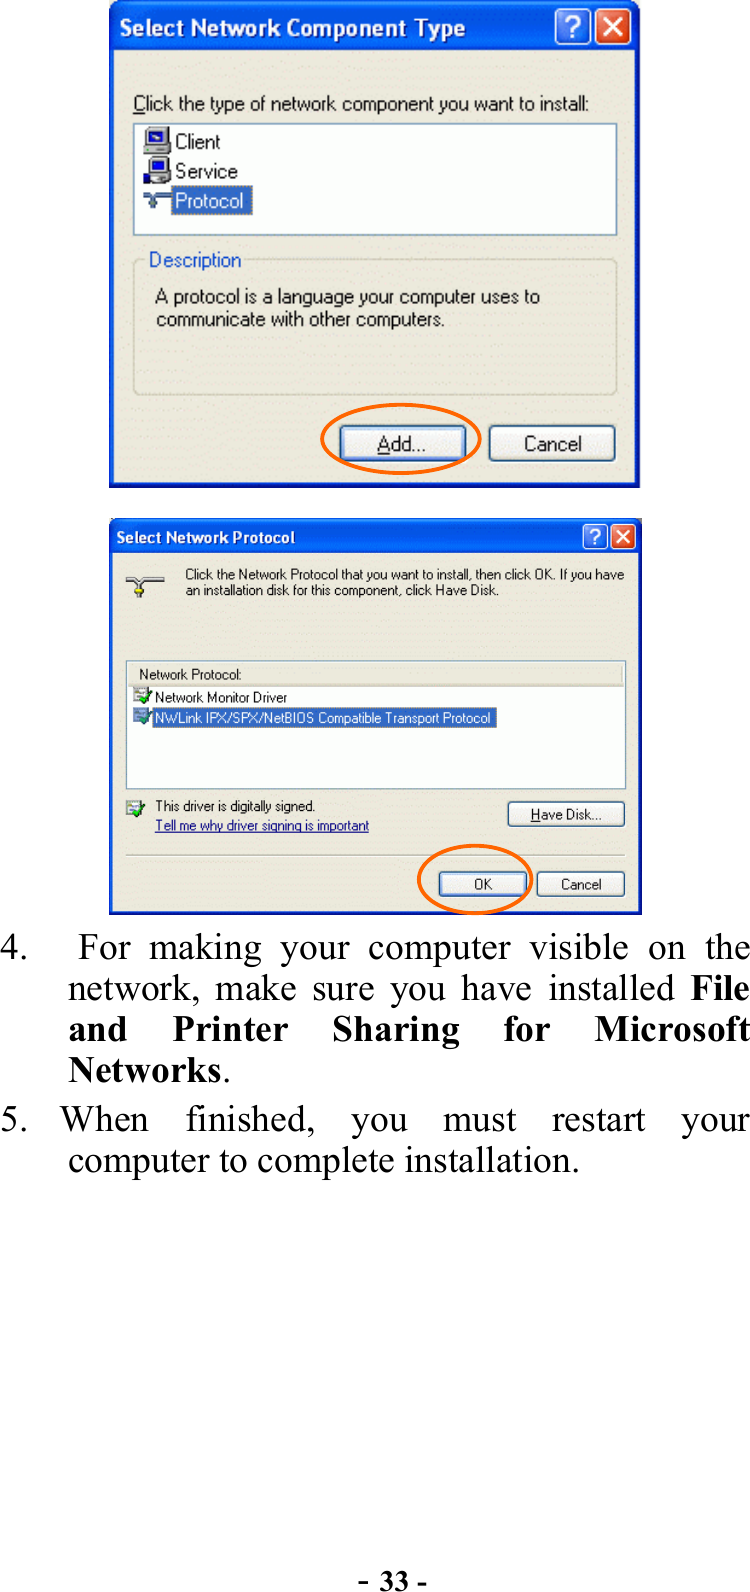  - 33 -   4.   For making your computer visible on the network, make sure you have installed File and Printer Sharing for Microsoft Networks. 5. When finished, you must restart your computer to complete installation. 